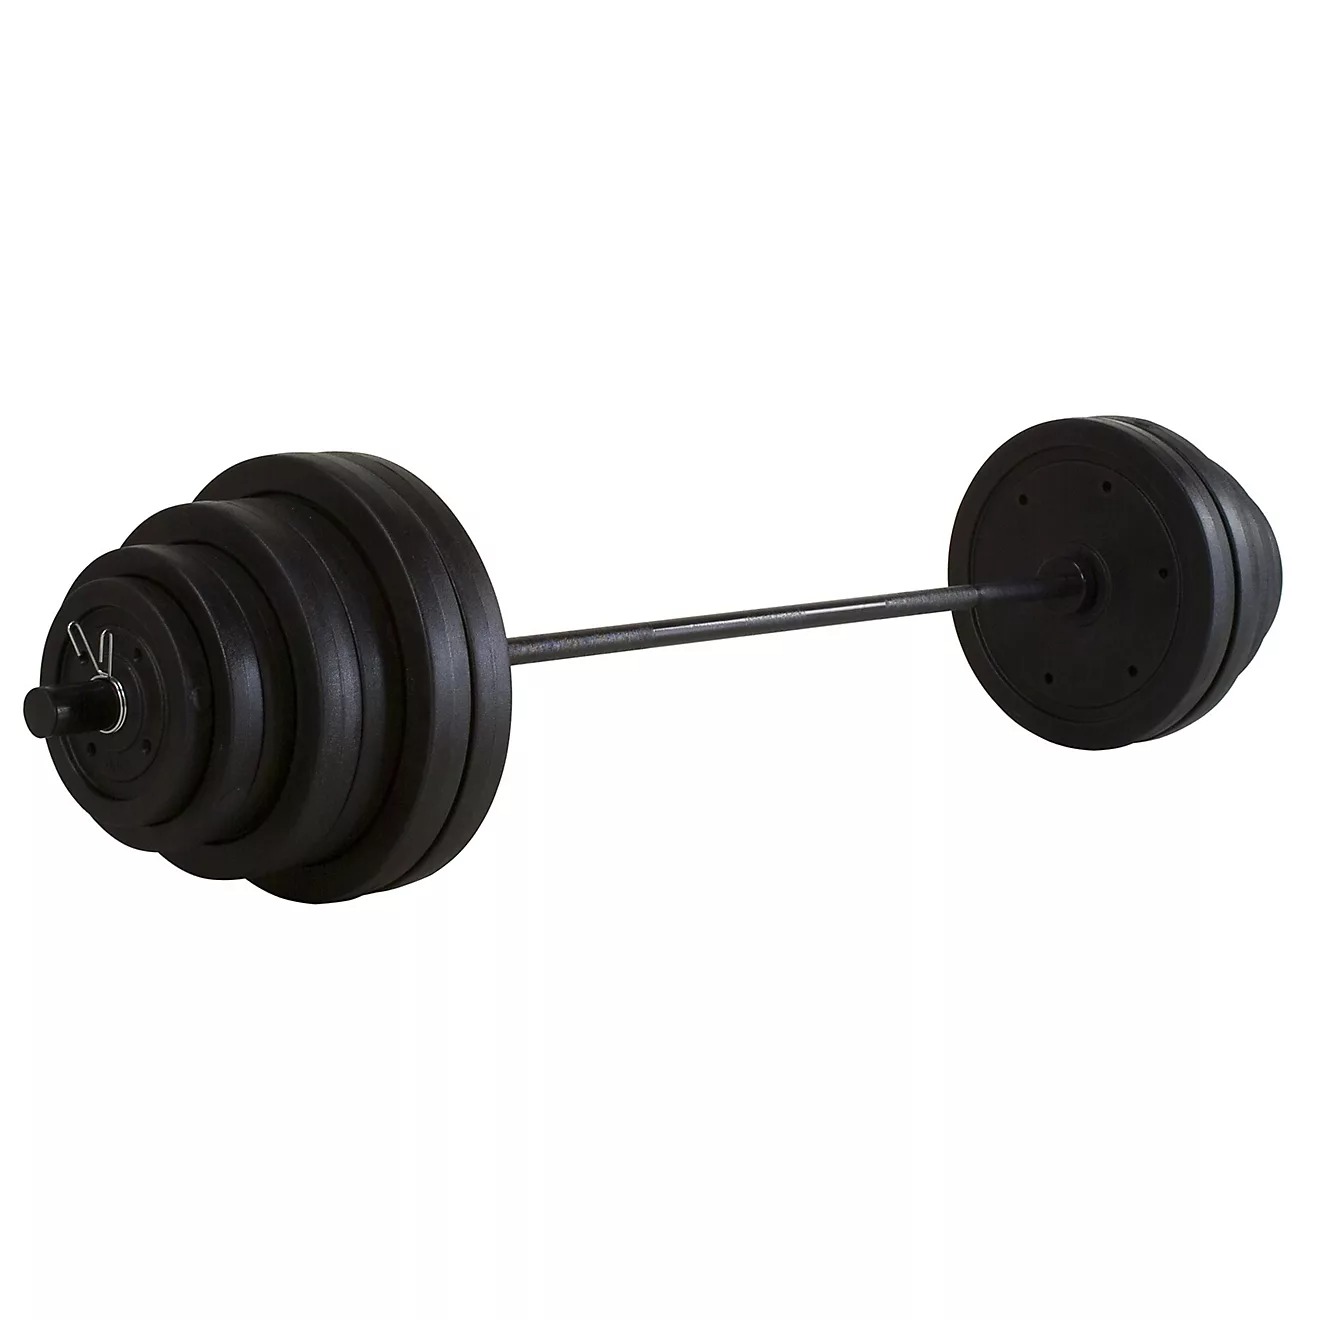 Marcy 300 lb Vinyl Olympic Weight Set $5.98